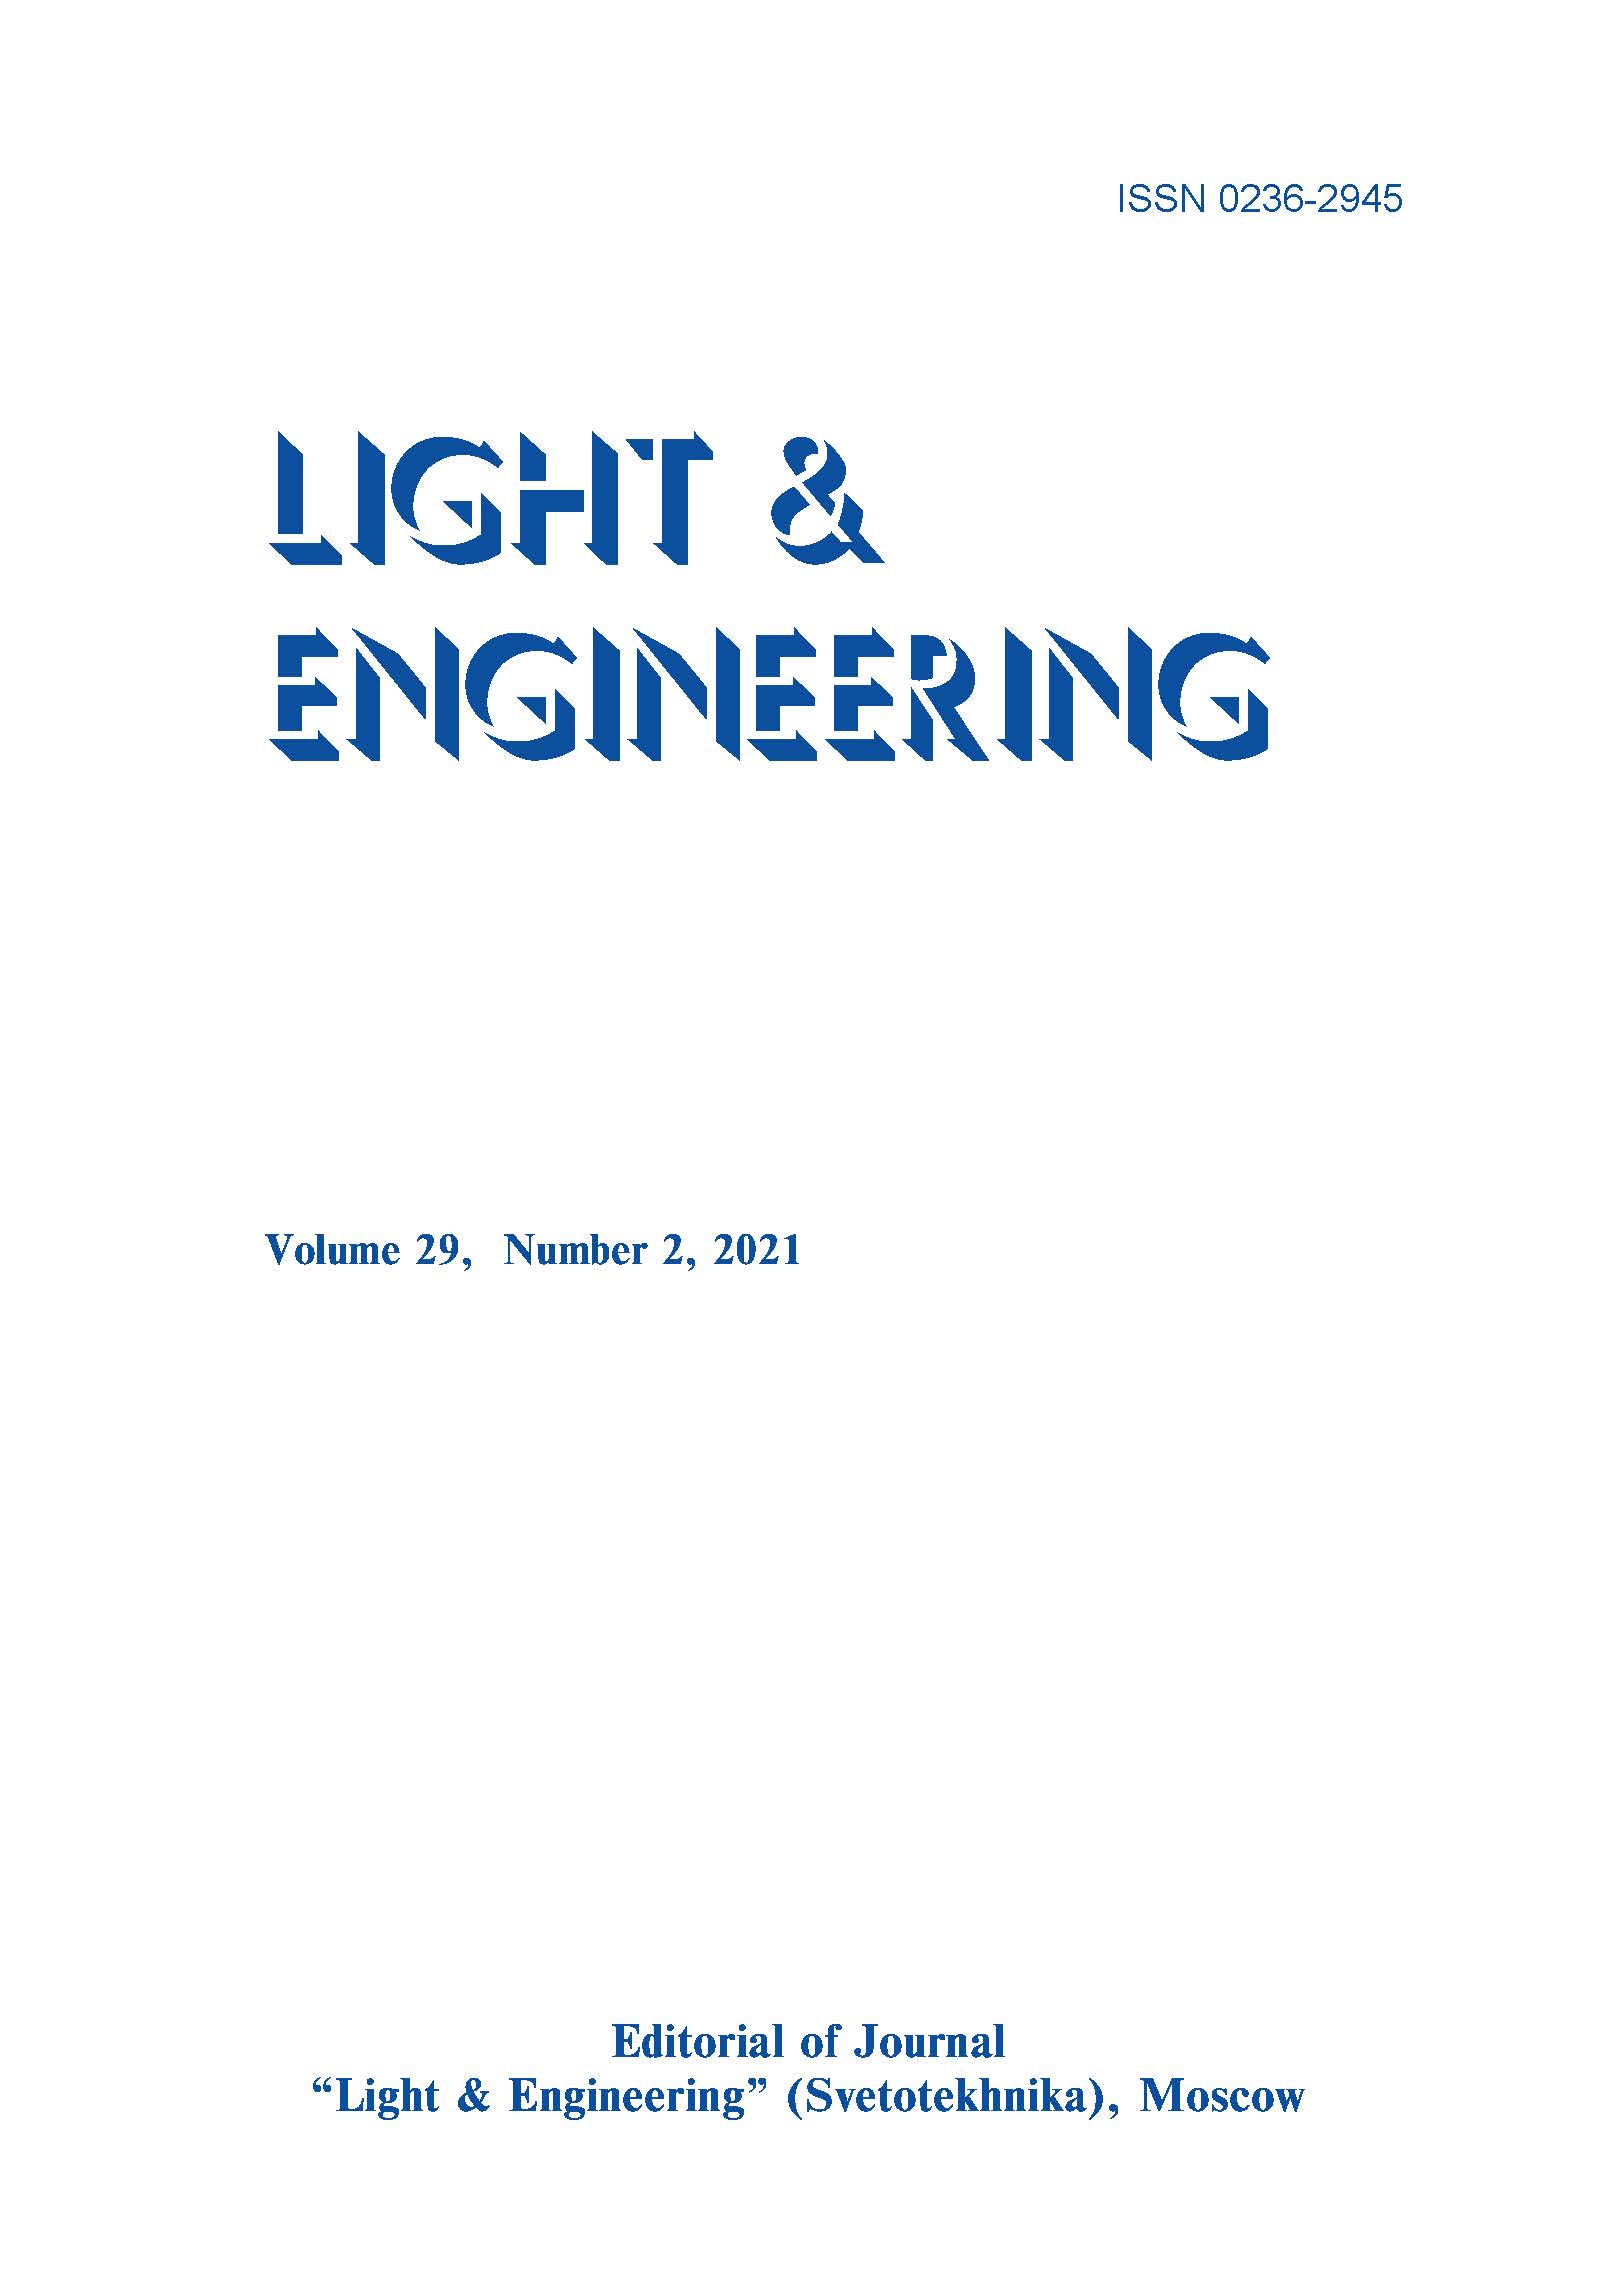 Energy Saving in Lighting Technologies of Agricultural Production L&E, Vol. 29, No. 2, 2021